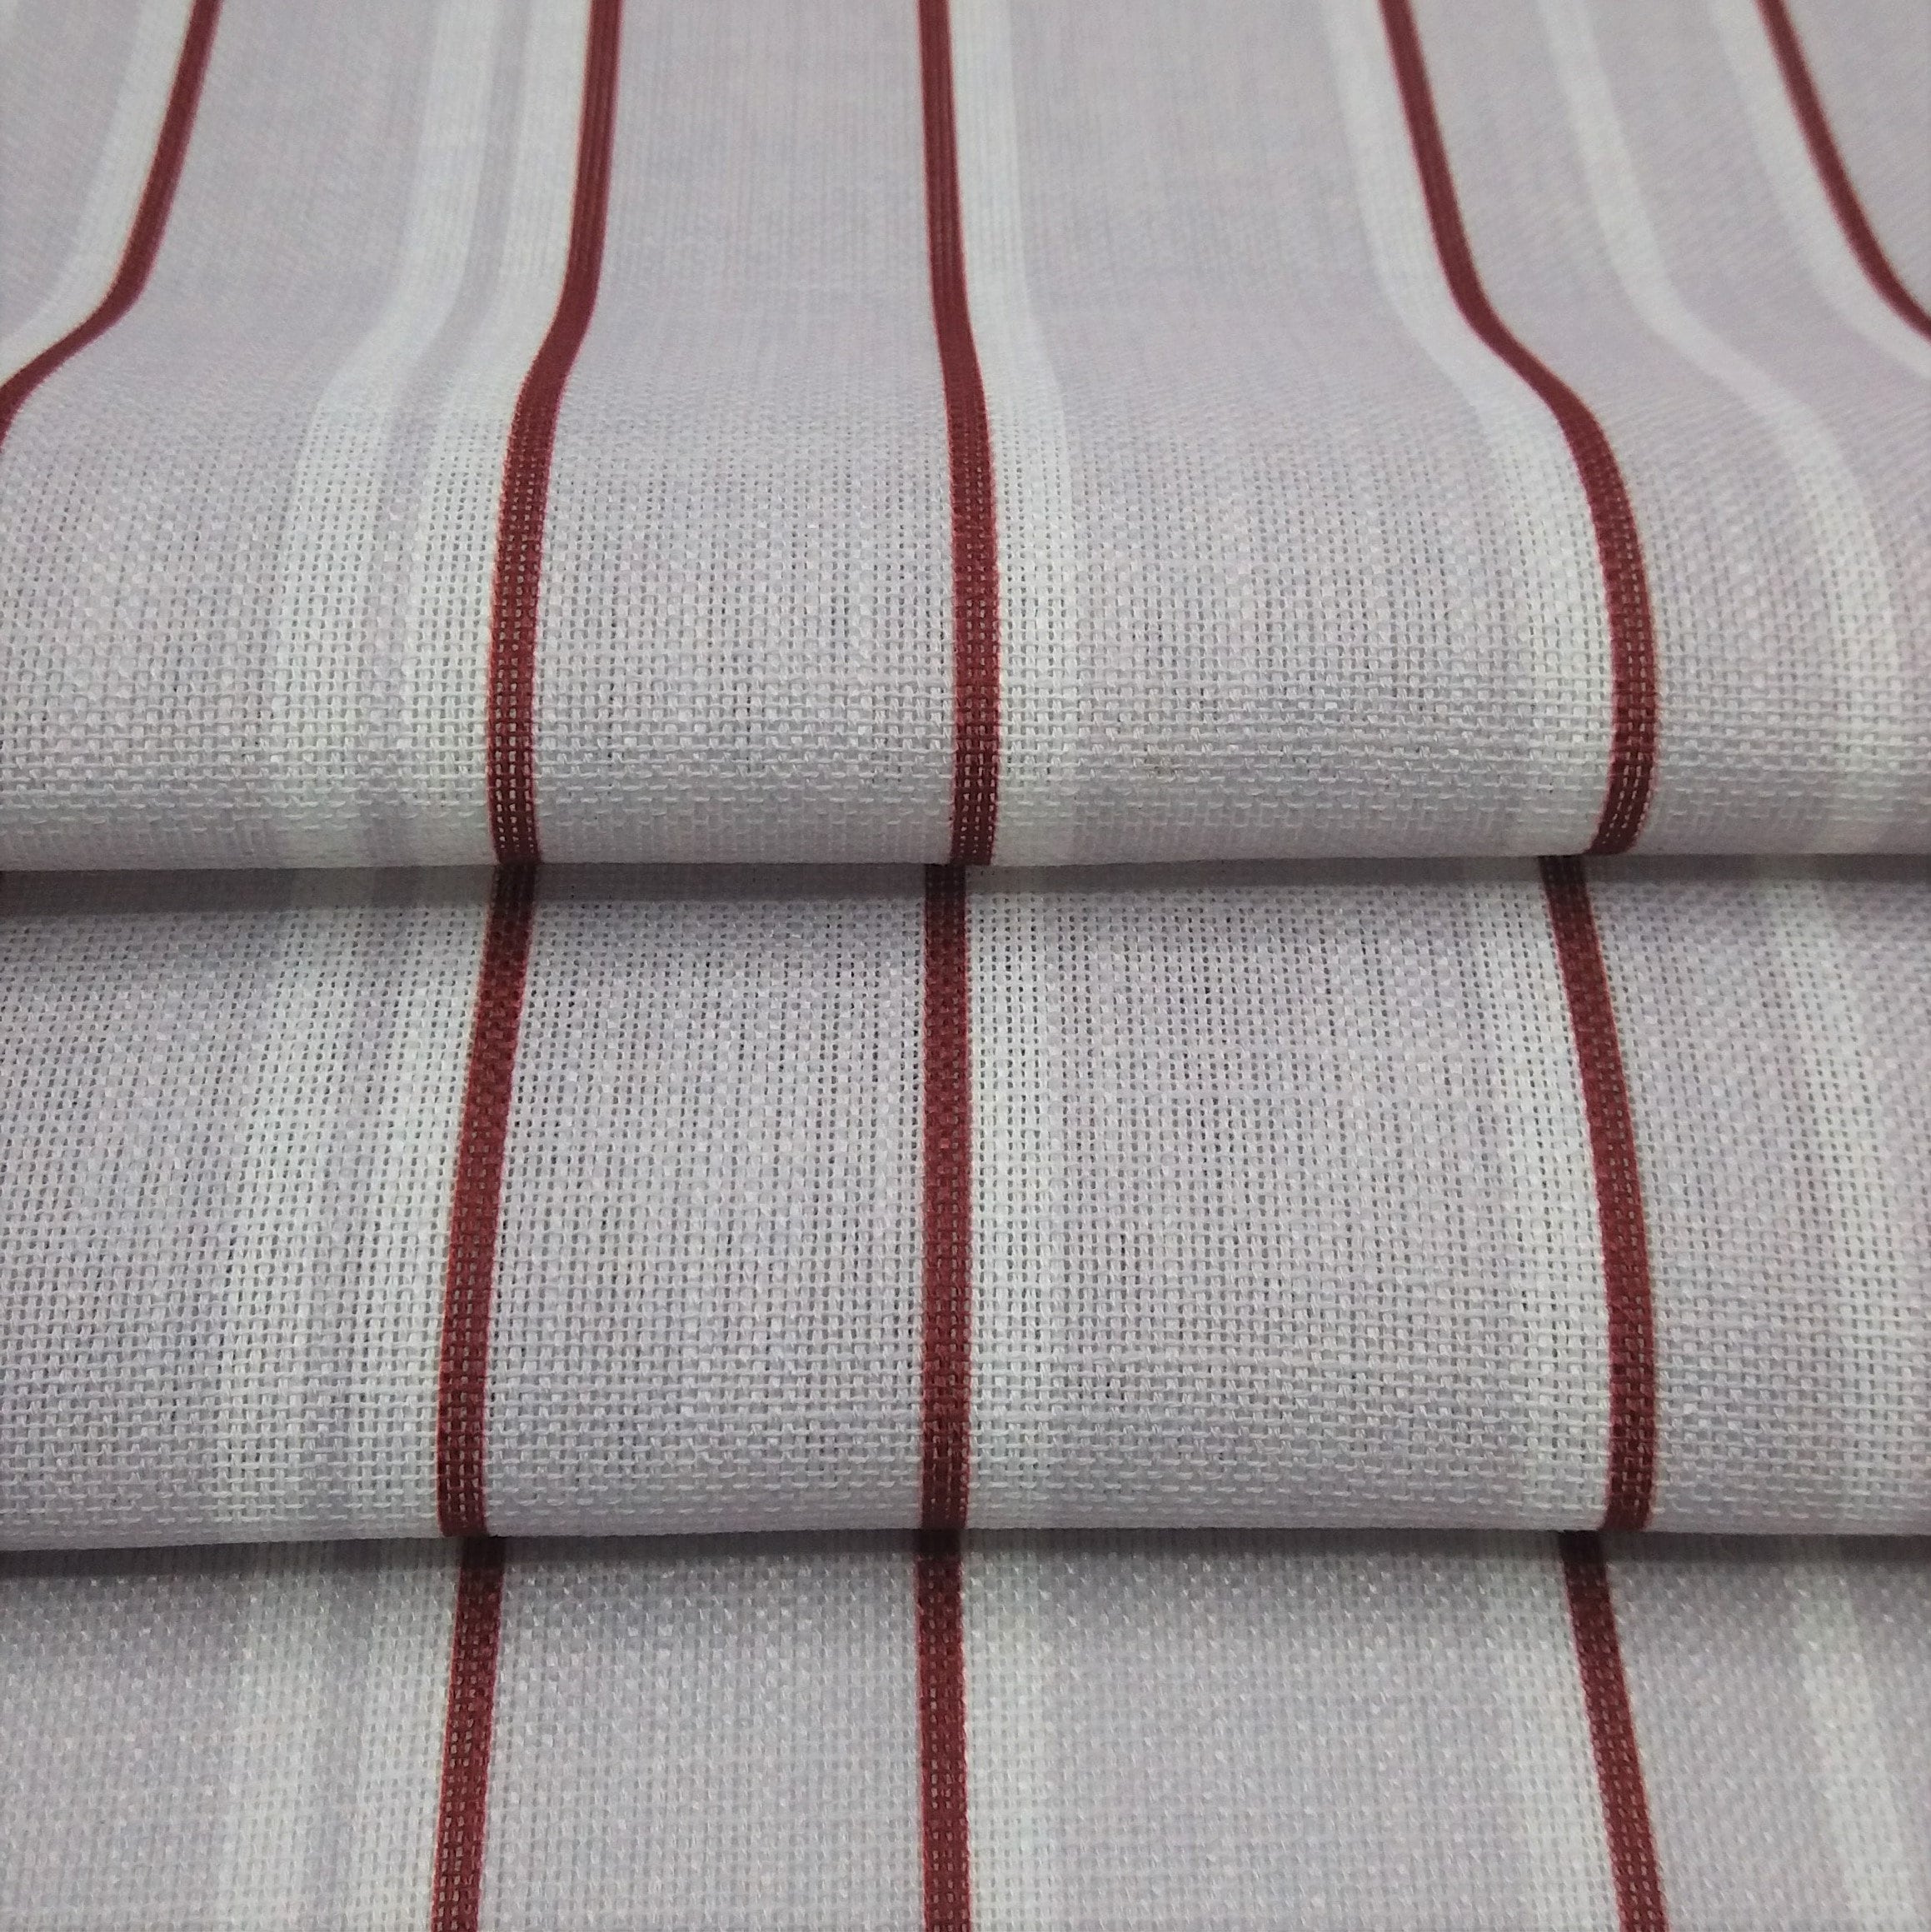 deckchair stripe fabric in green and red by the meter 